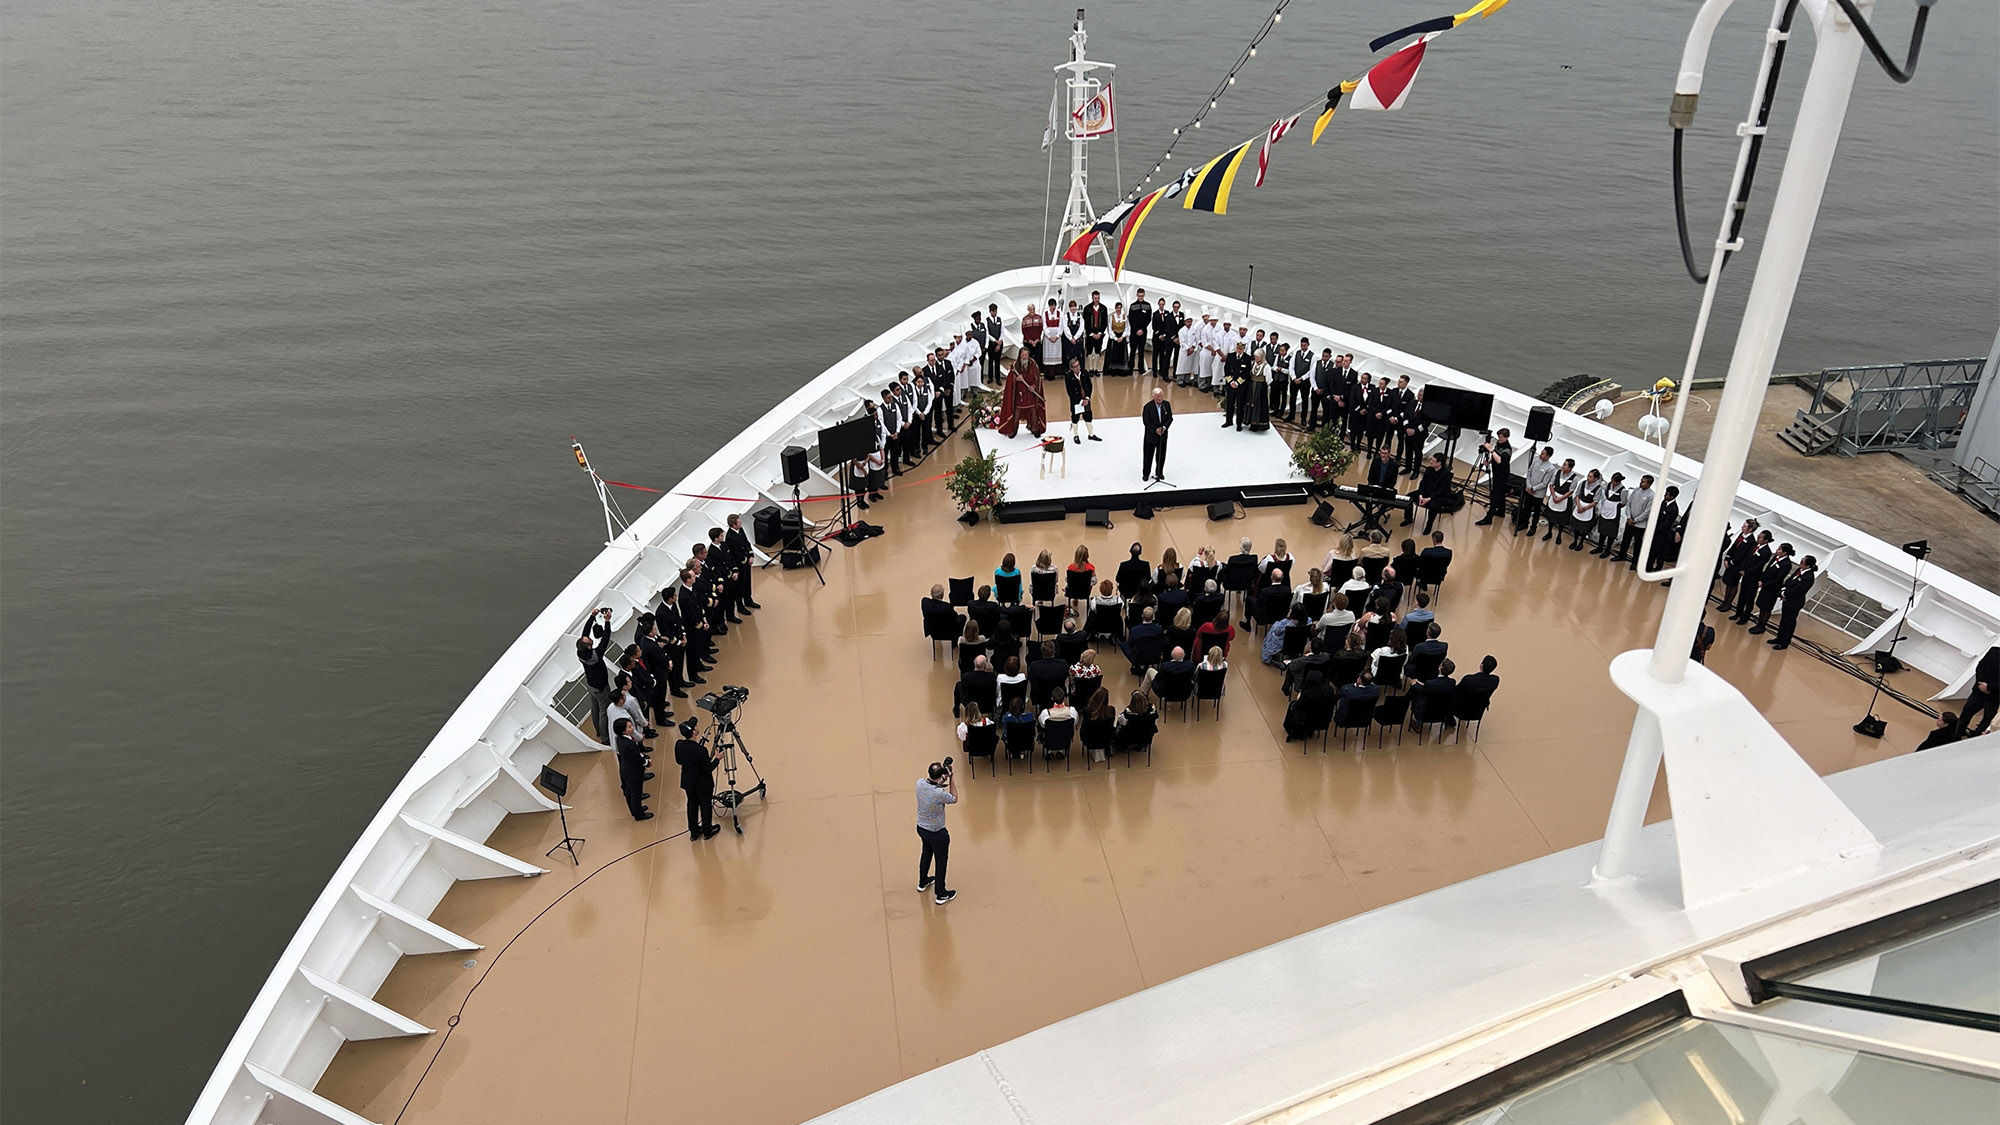 The Viking Saturn naming ceremony as seen from the observation deck.